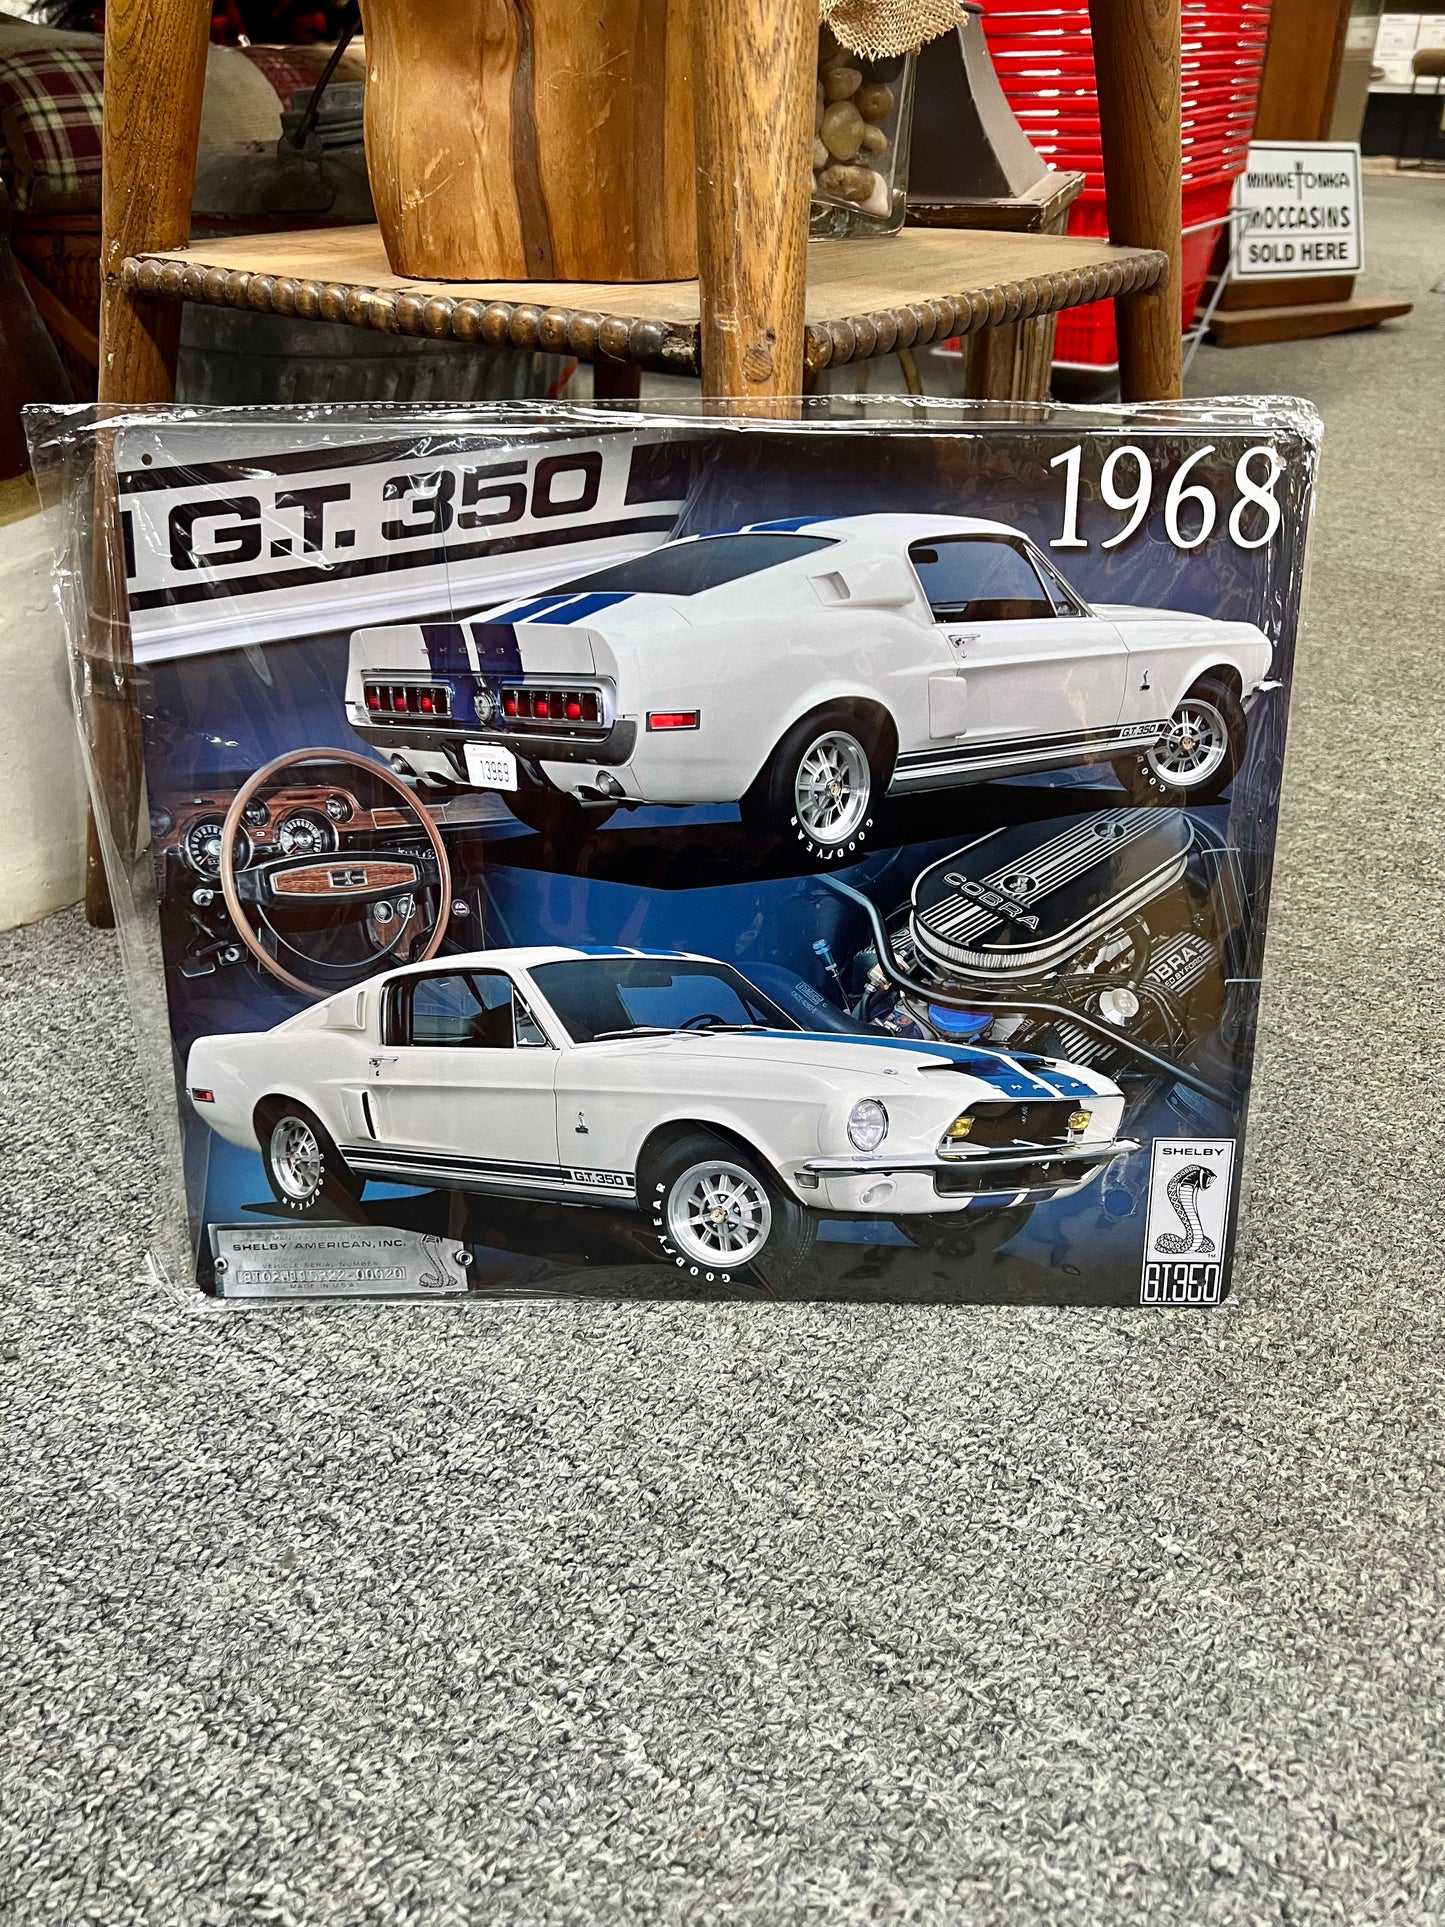 1968 Shelby G.T. 350 Metal Sign